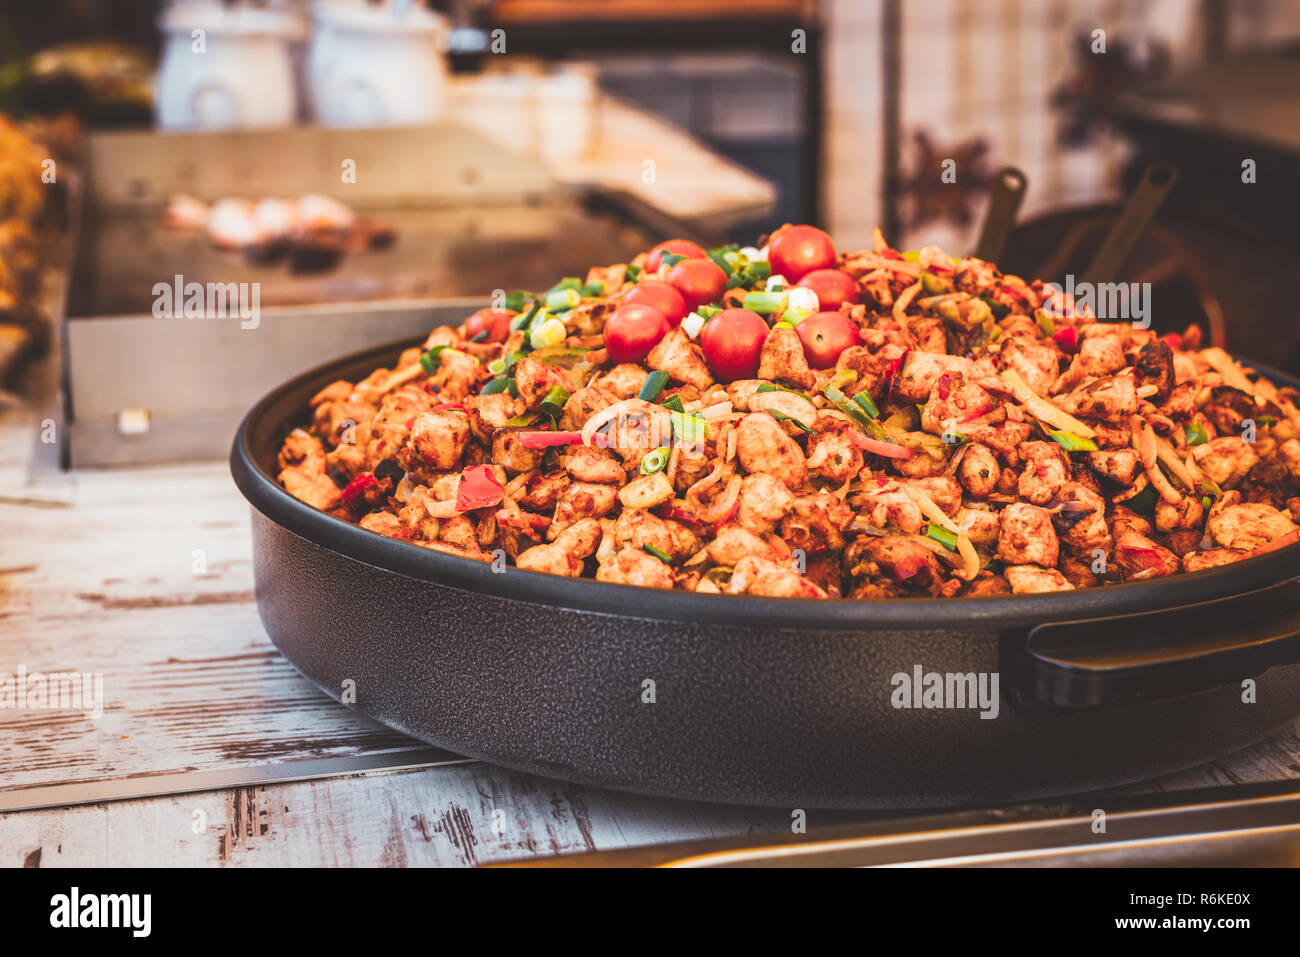 Big plate of meat ragout on the table. Street food photo Stock Photo